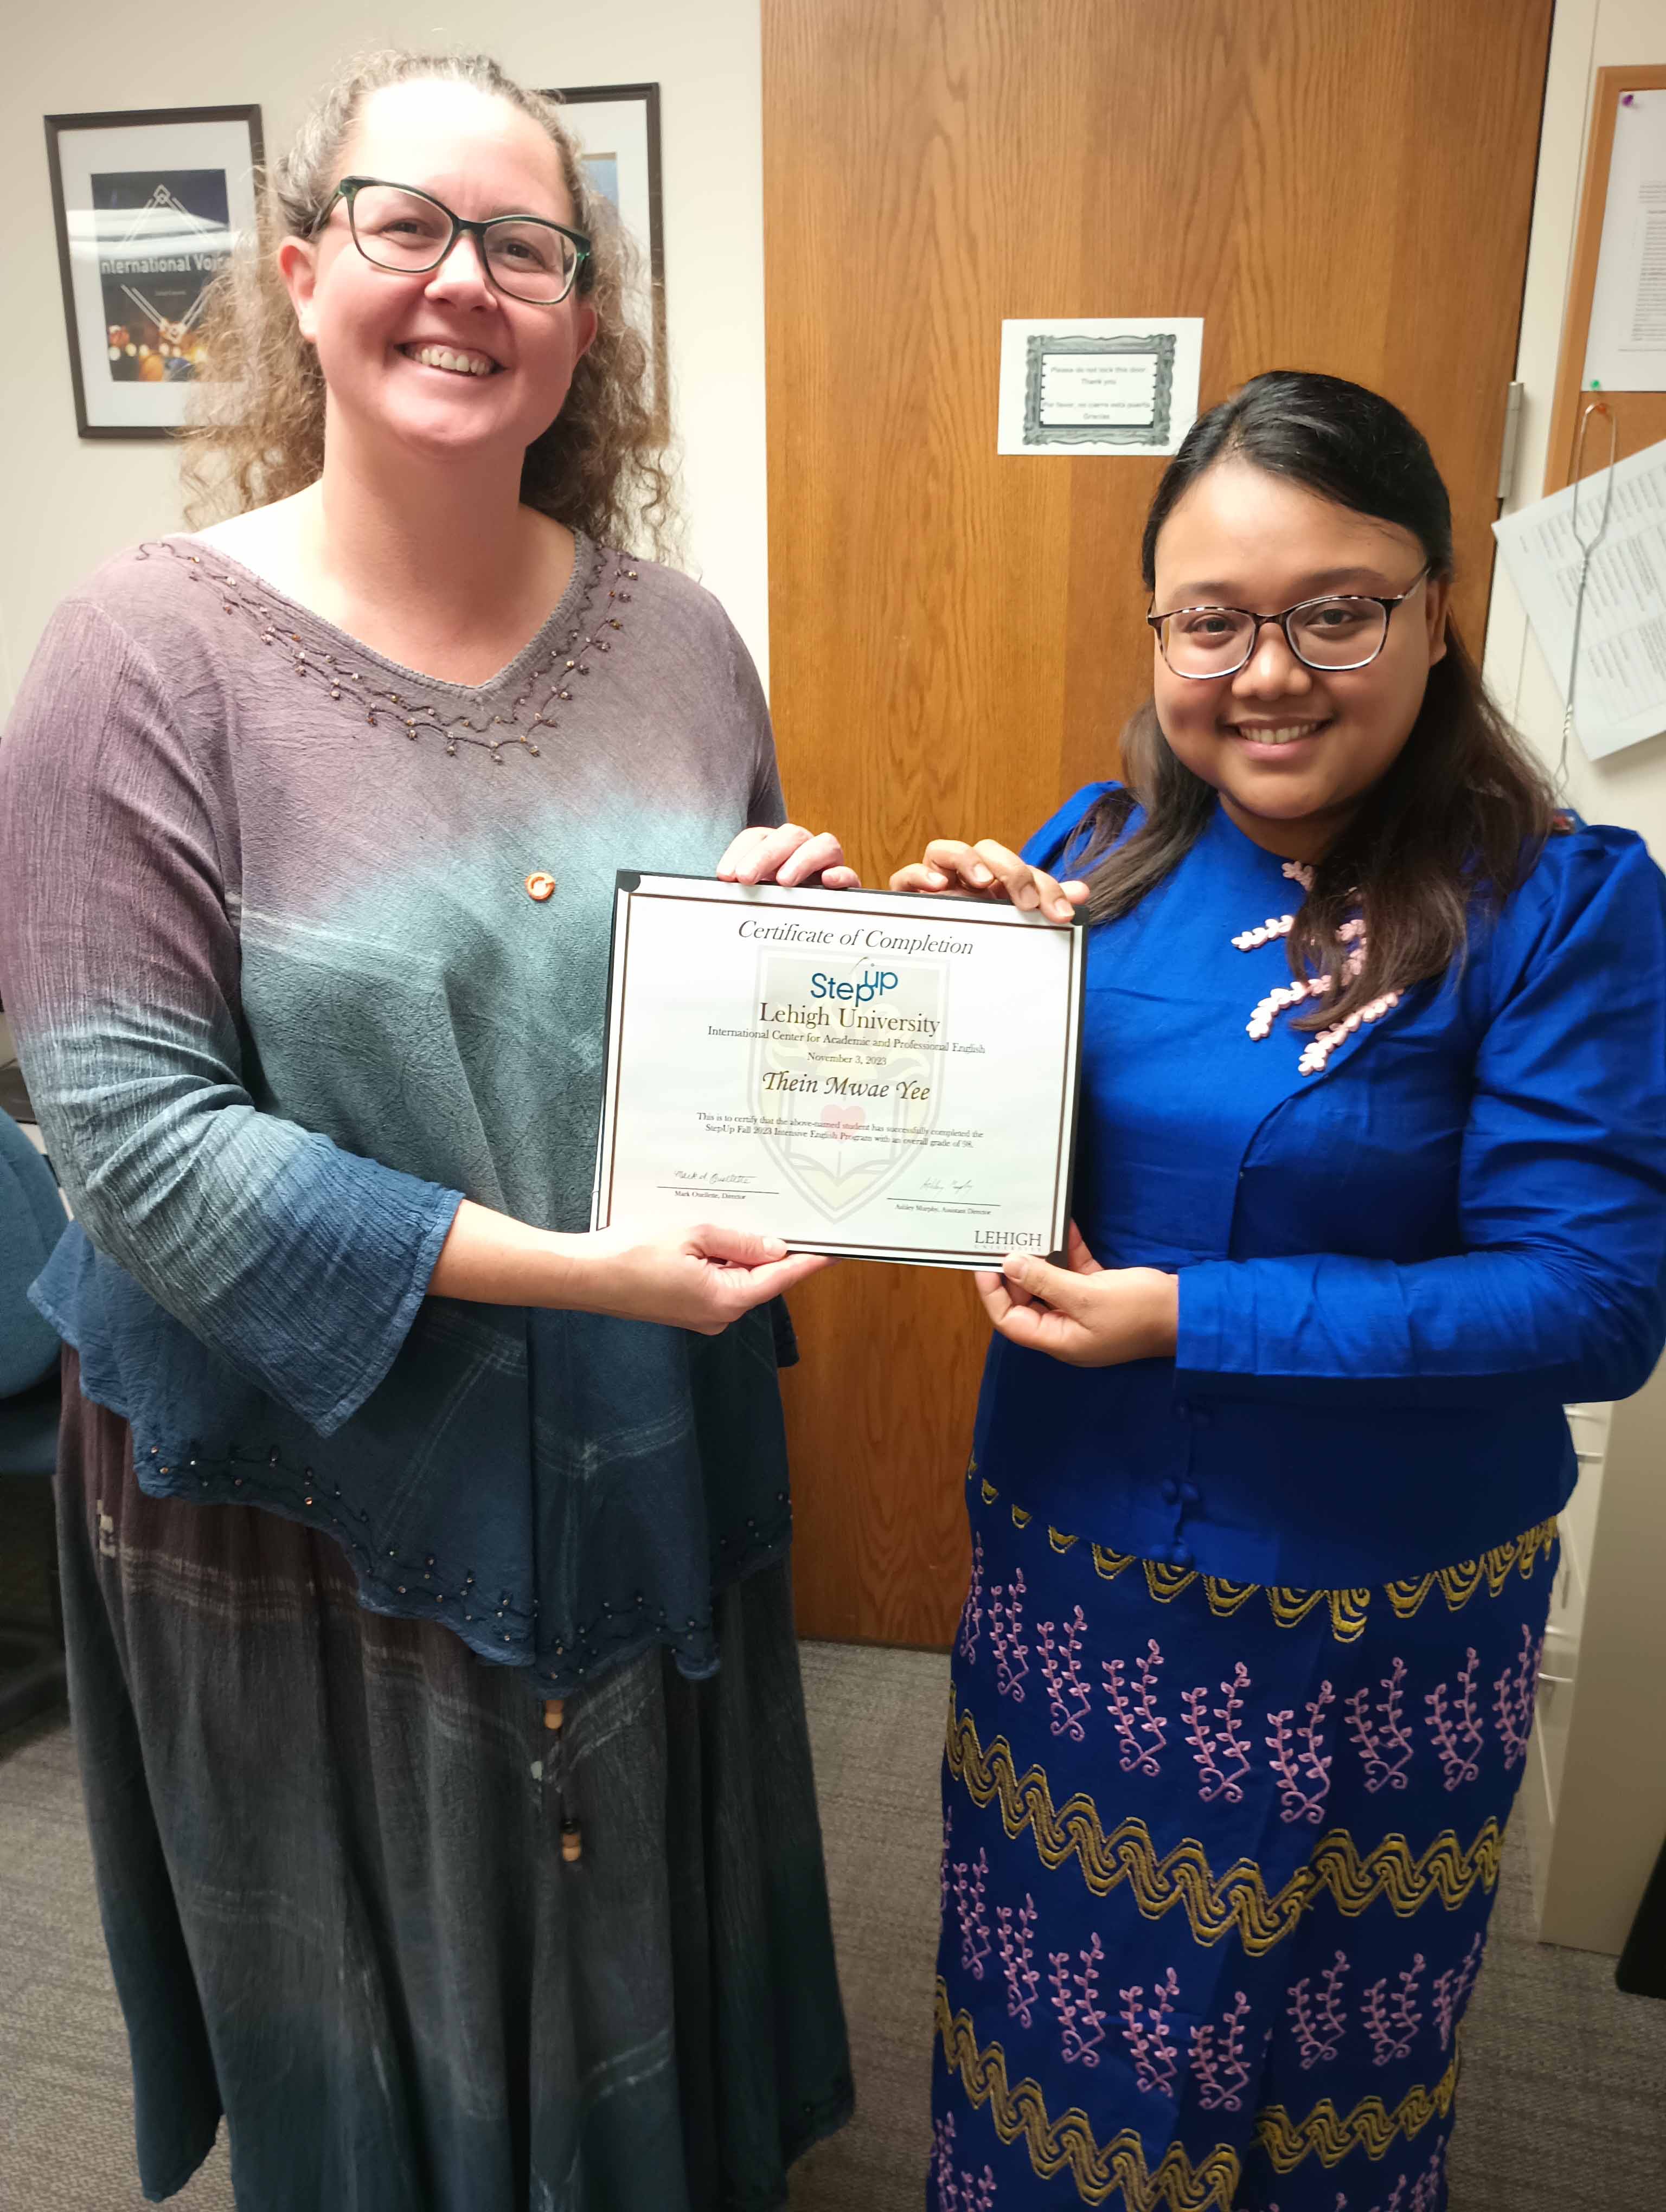 Ashley Murphy giving a certificate to Thein Mwae in a Lehigh University classroom